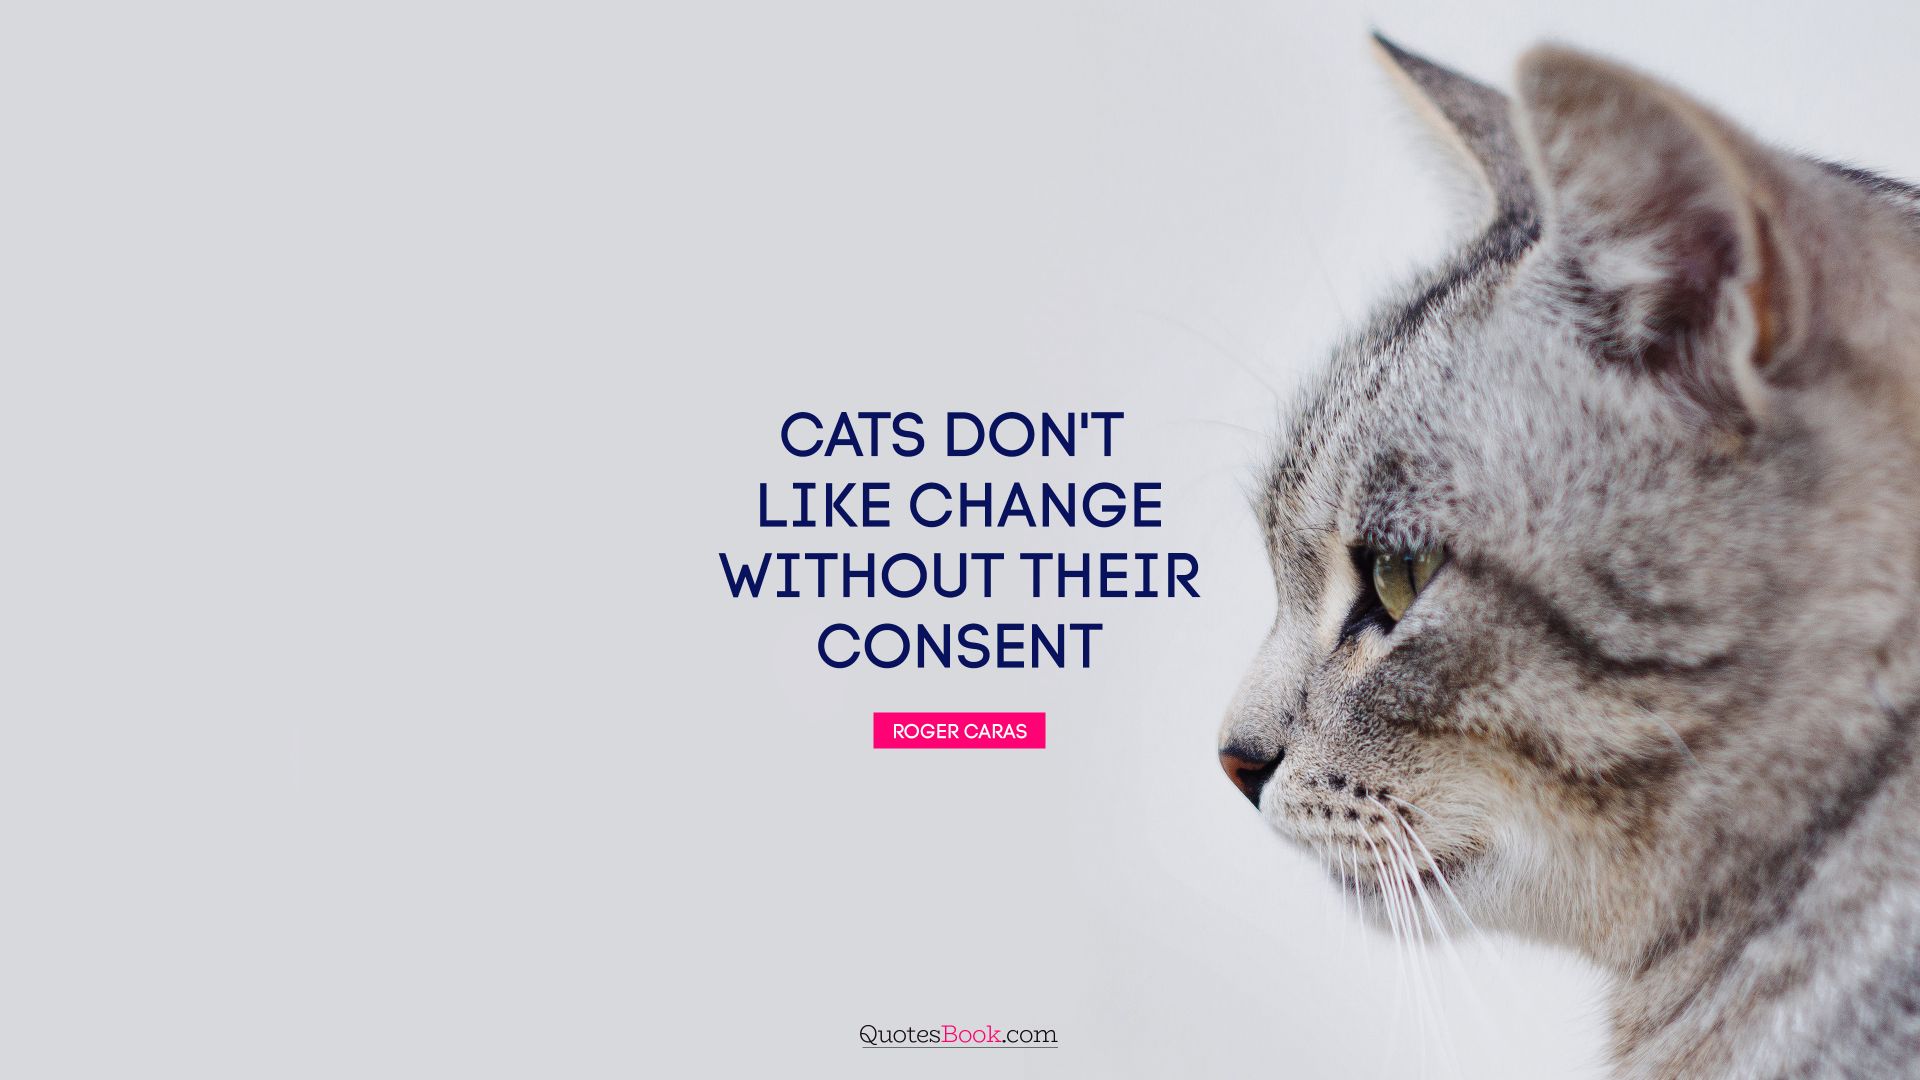 Cats don't like change without their consent. - Quote by Roger Caras